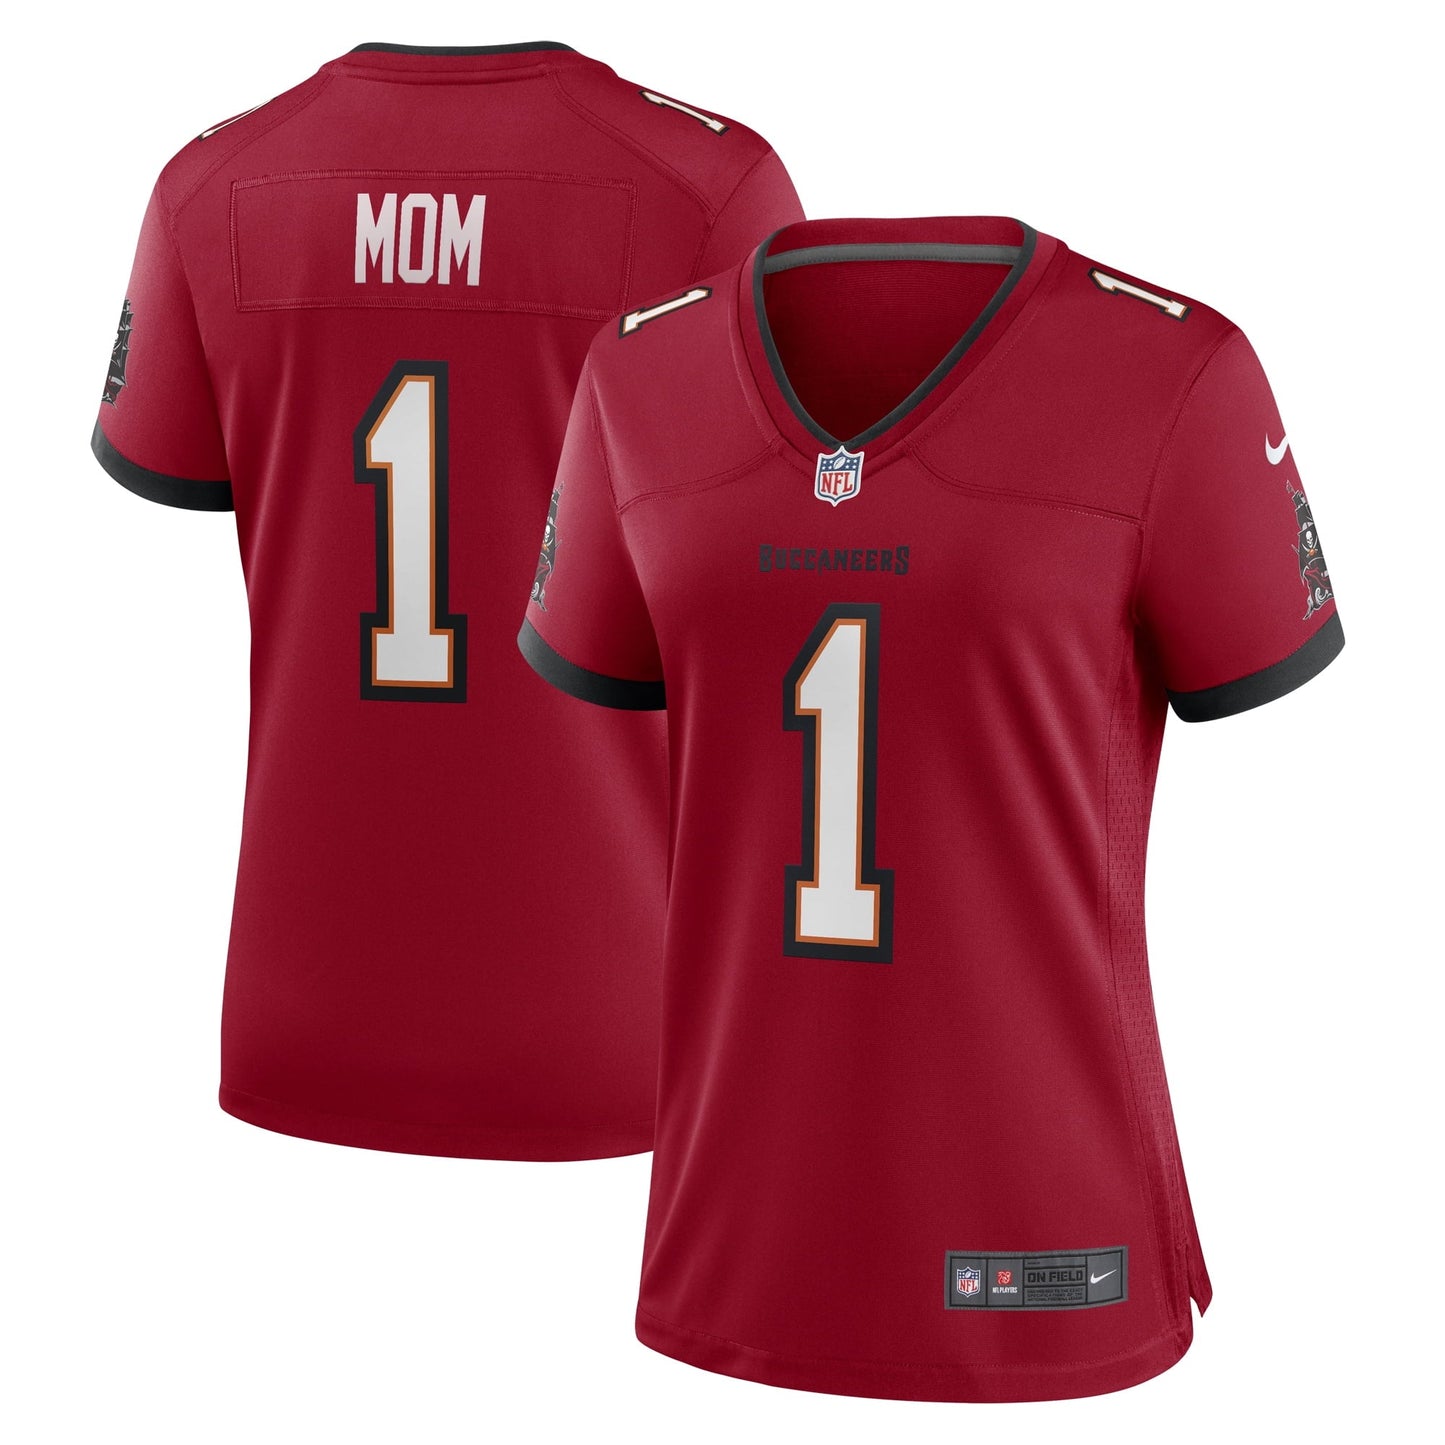 Women's Nike Number 1 Mom Red Tampa Bay Buccaneers Game Jersey